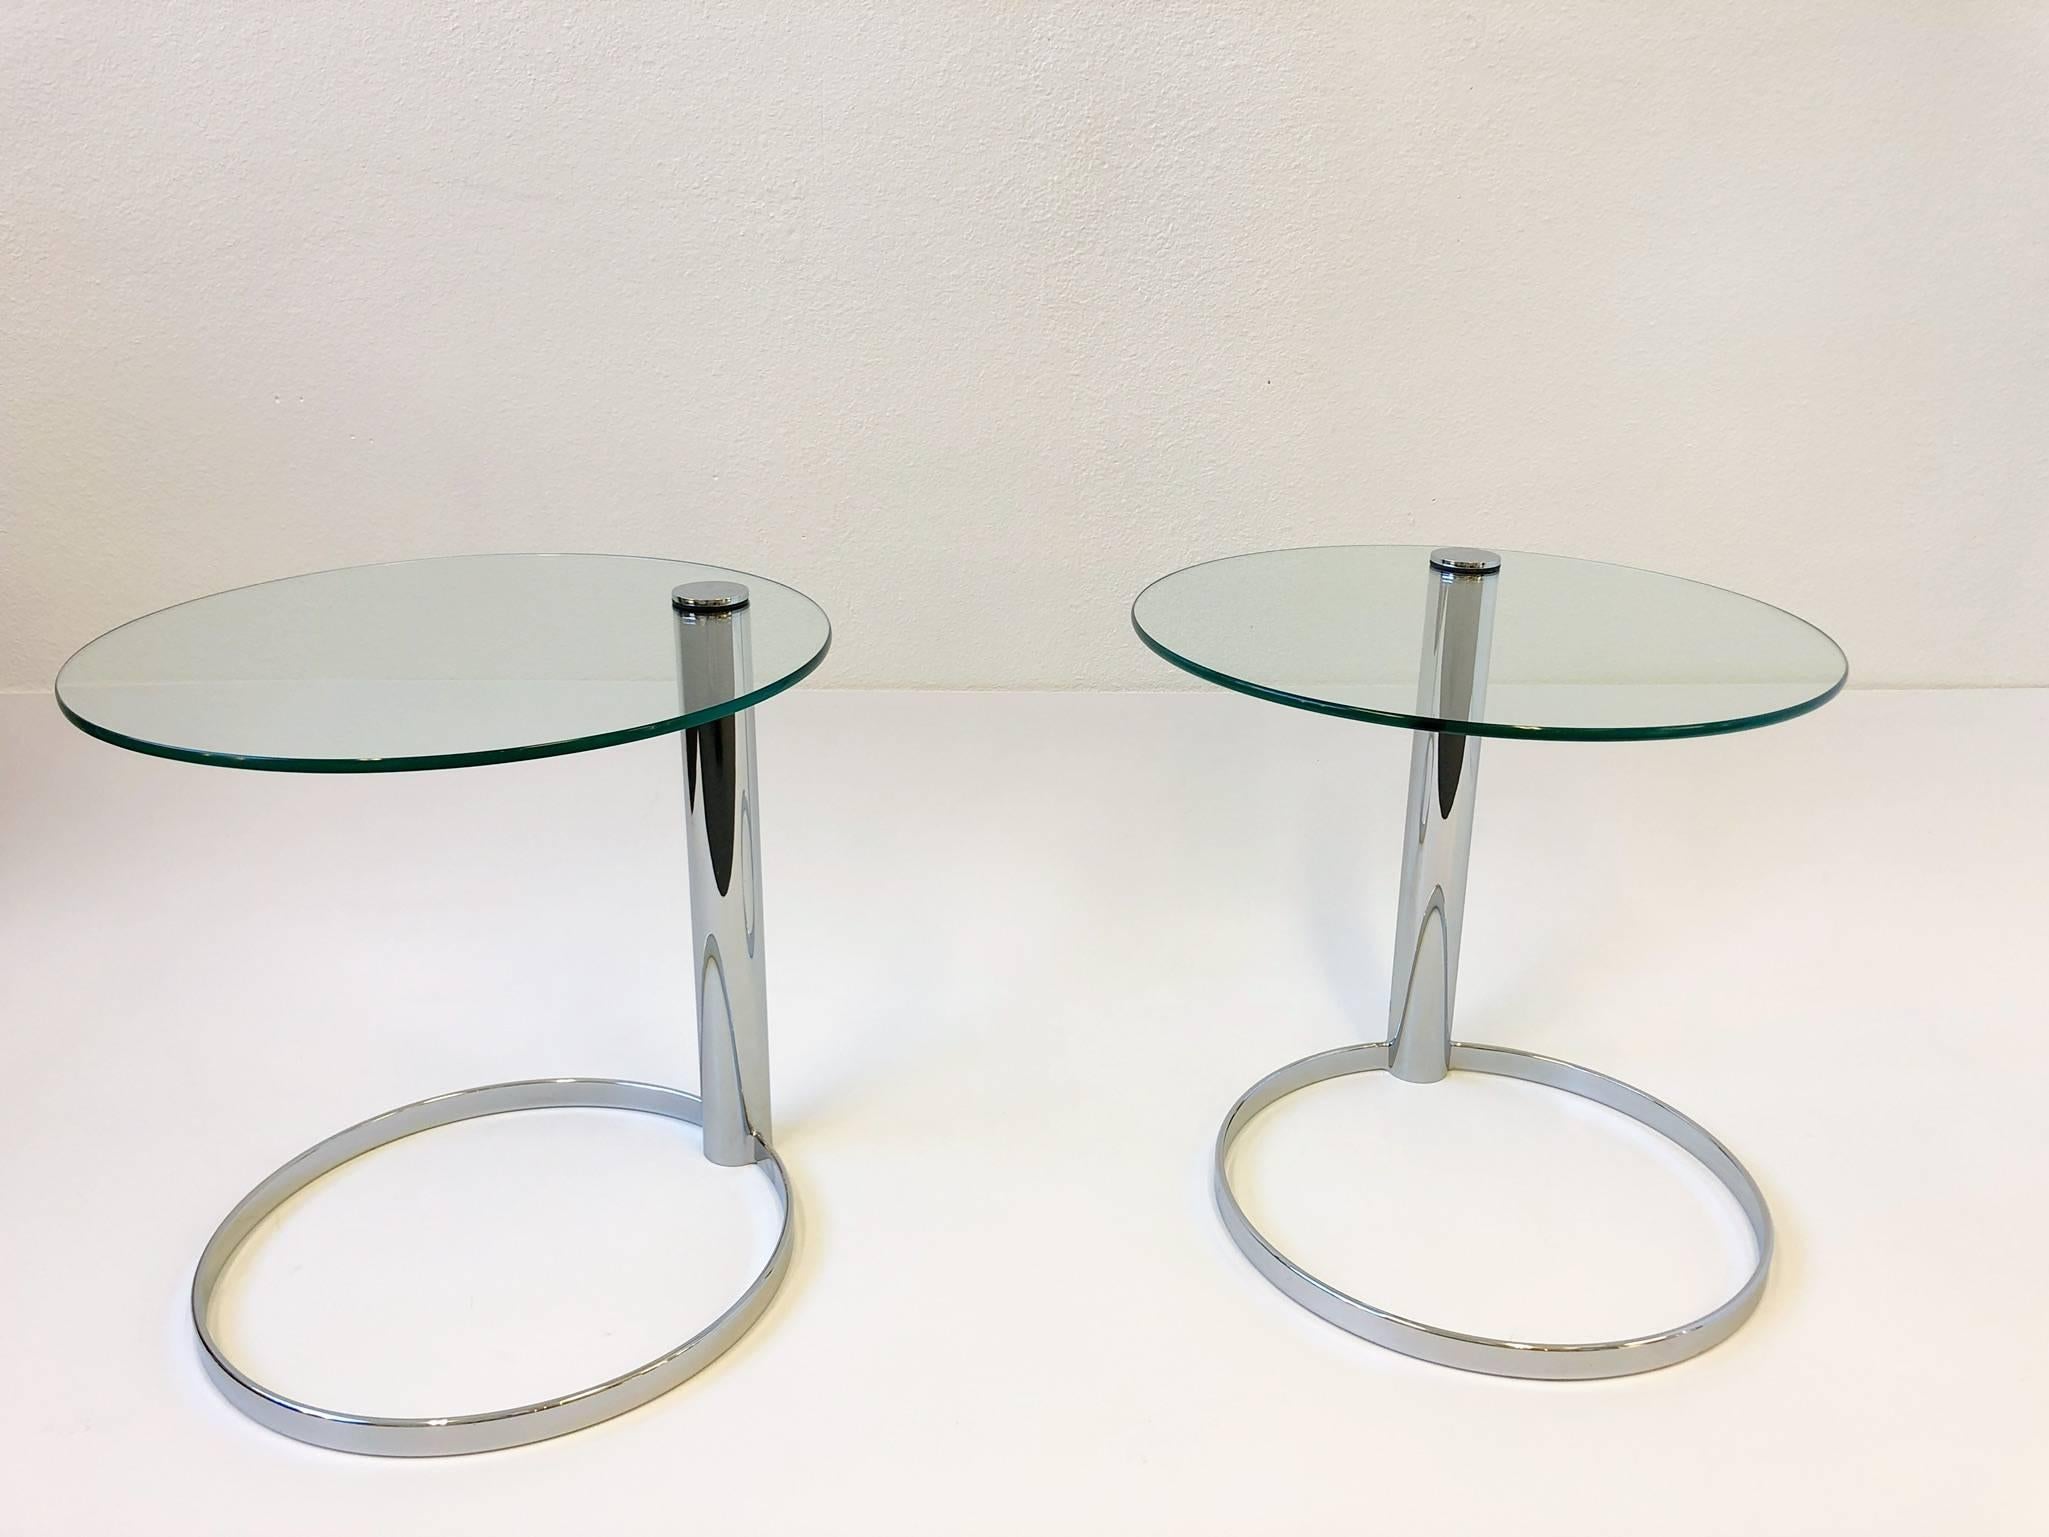 Pair of Chrome and Glass Side Tables by John Mascheroni for Swaim 2